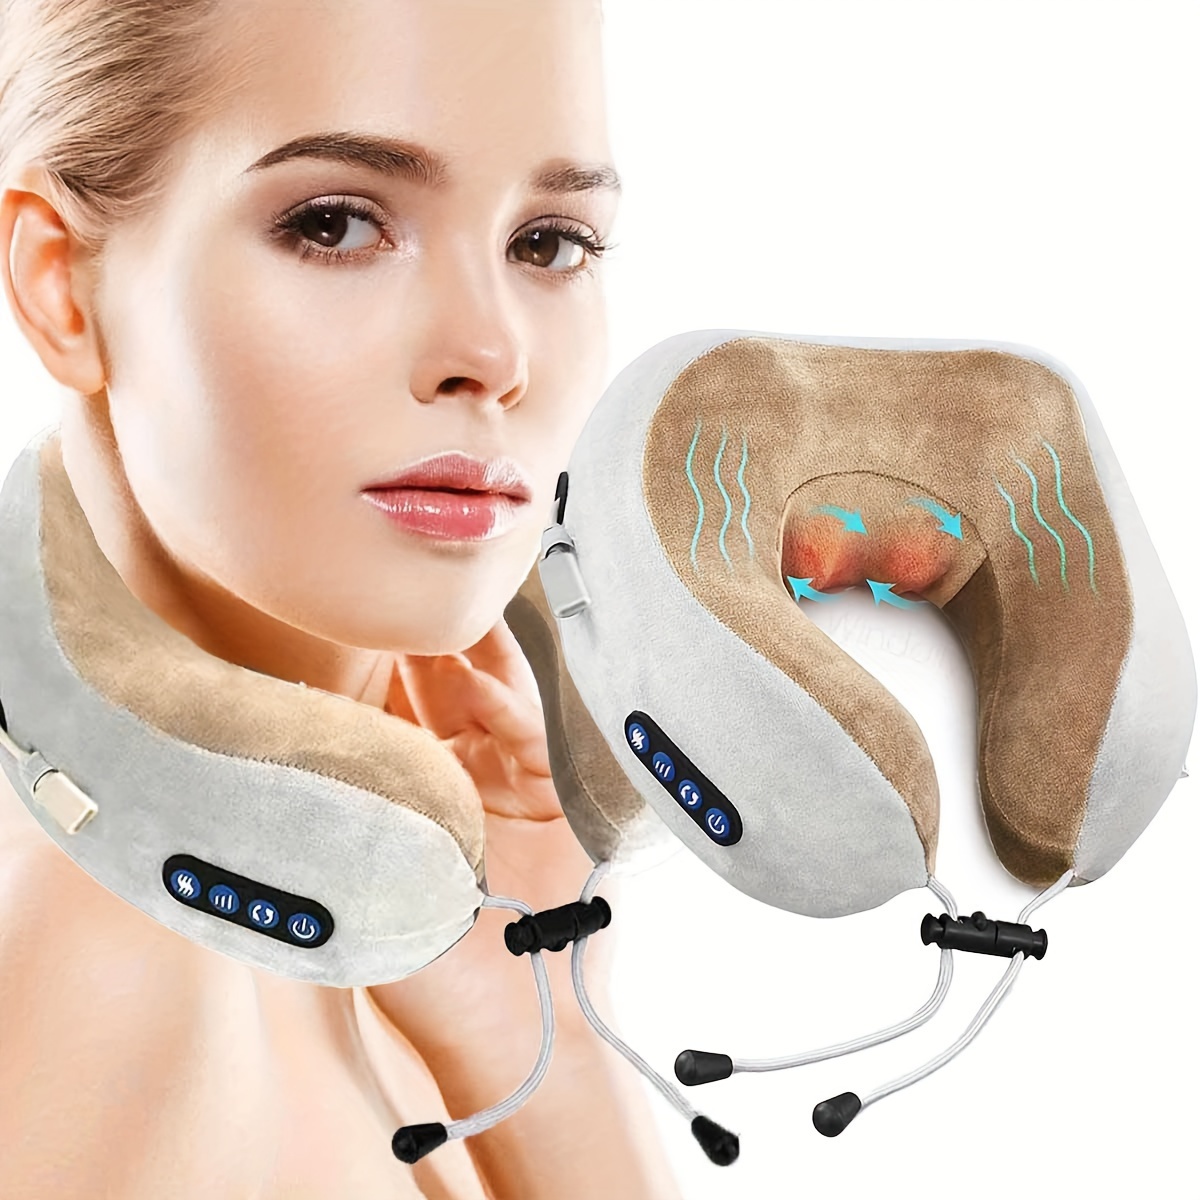 

Electric Portable Neck Massage Pillow, 3-speed, 3 Modes, Constant Heat, Rechargeable U-shaped Cushion For Home & Office Use